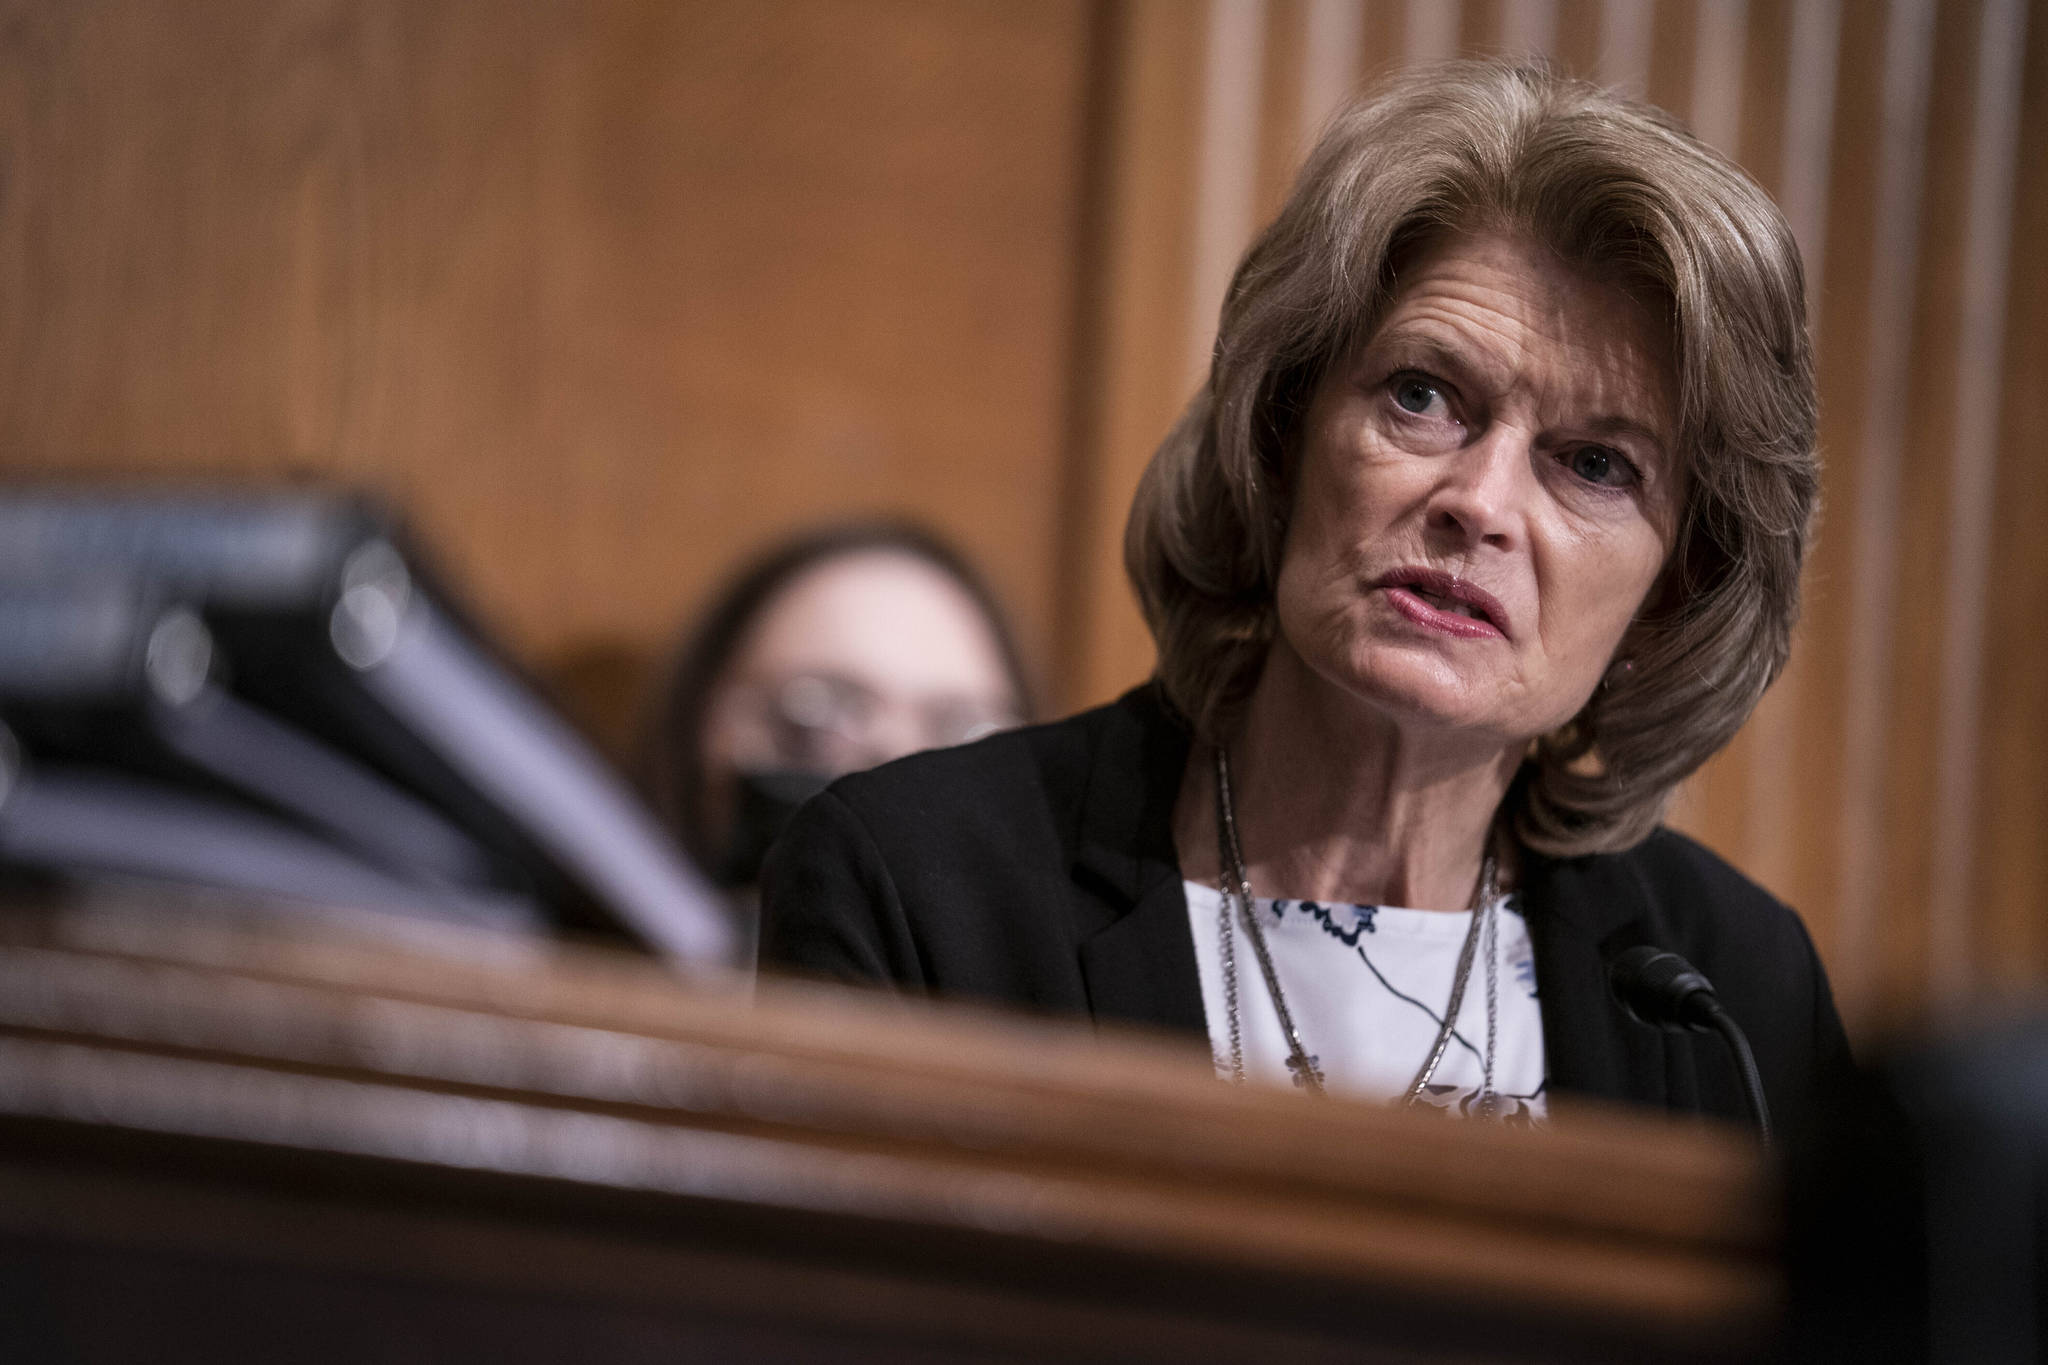 U.S. Sen. Lisa Murkowski, R-Alaska, speaks during a hearing on Capitol Hill in Washington. The Alaska Republican Party has not only censured Sen. Murkowski for voting to convict former President Donald Trump in his impeachment trial, but it also does not want her to identity as a GOP candidate in next year’s election, a member of the party’s State Central Committee said Tuesday, March 16, 2021. (Sarah Silbiger / Pool Photo via AP)